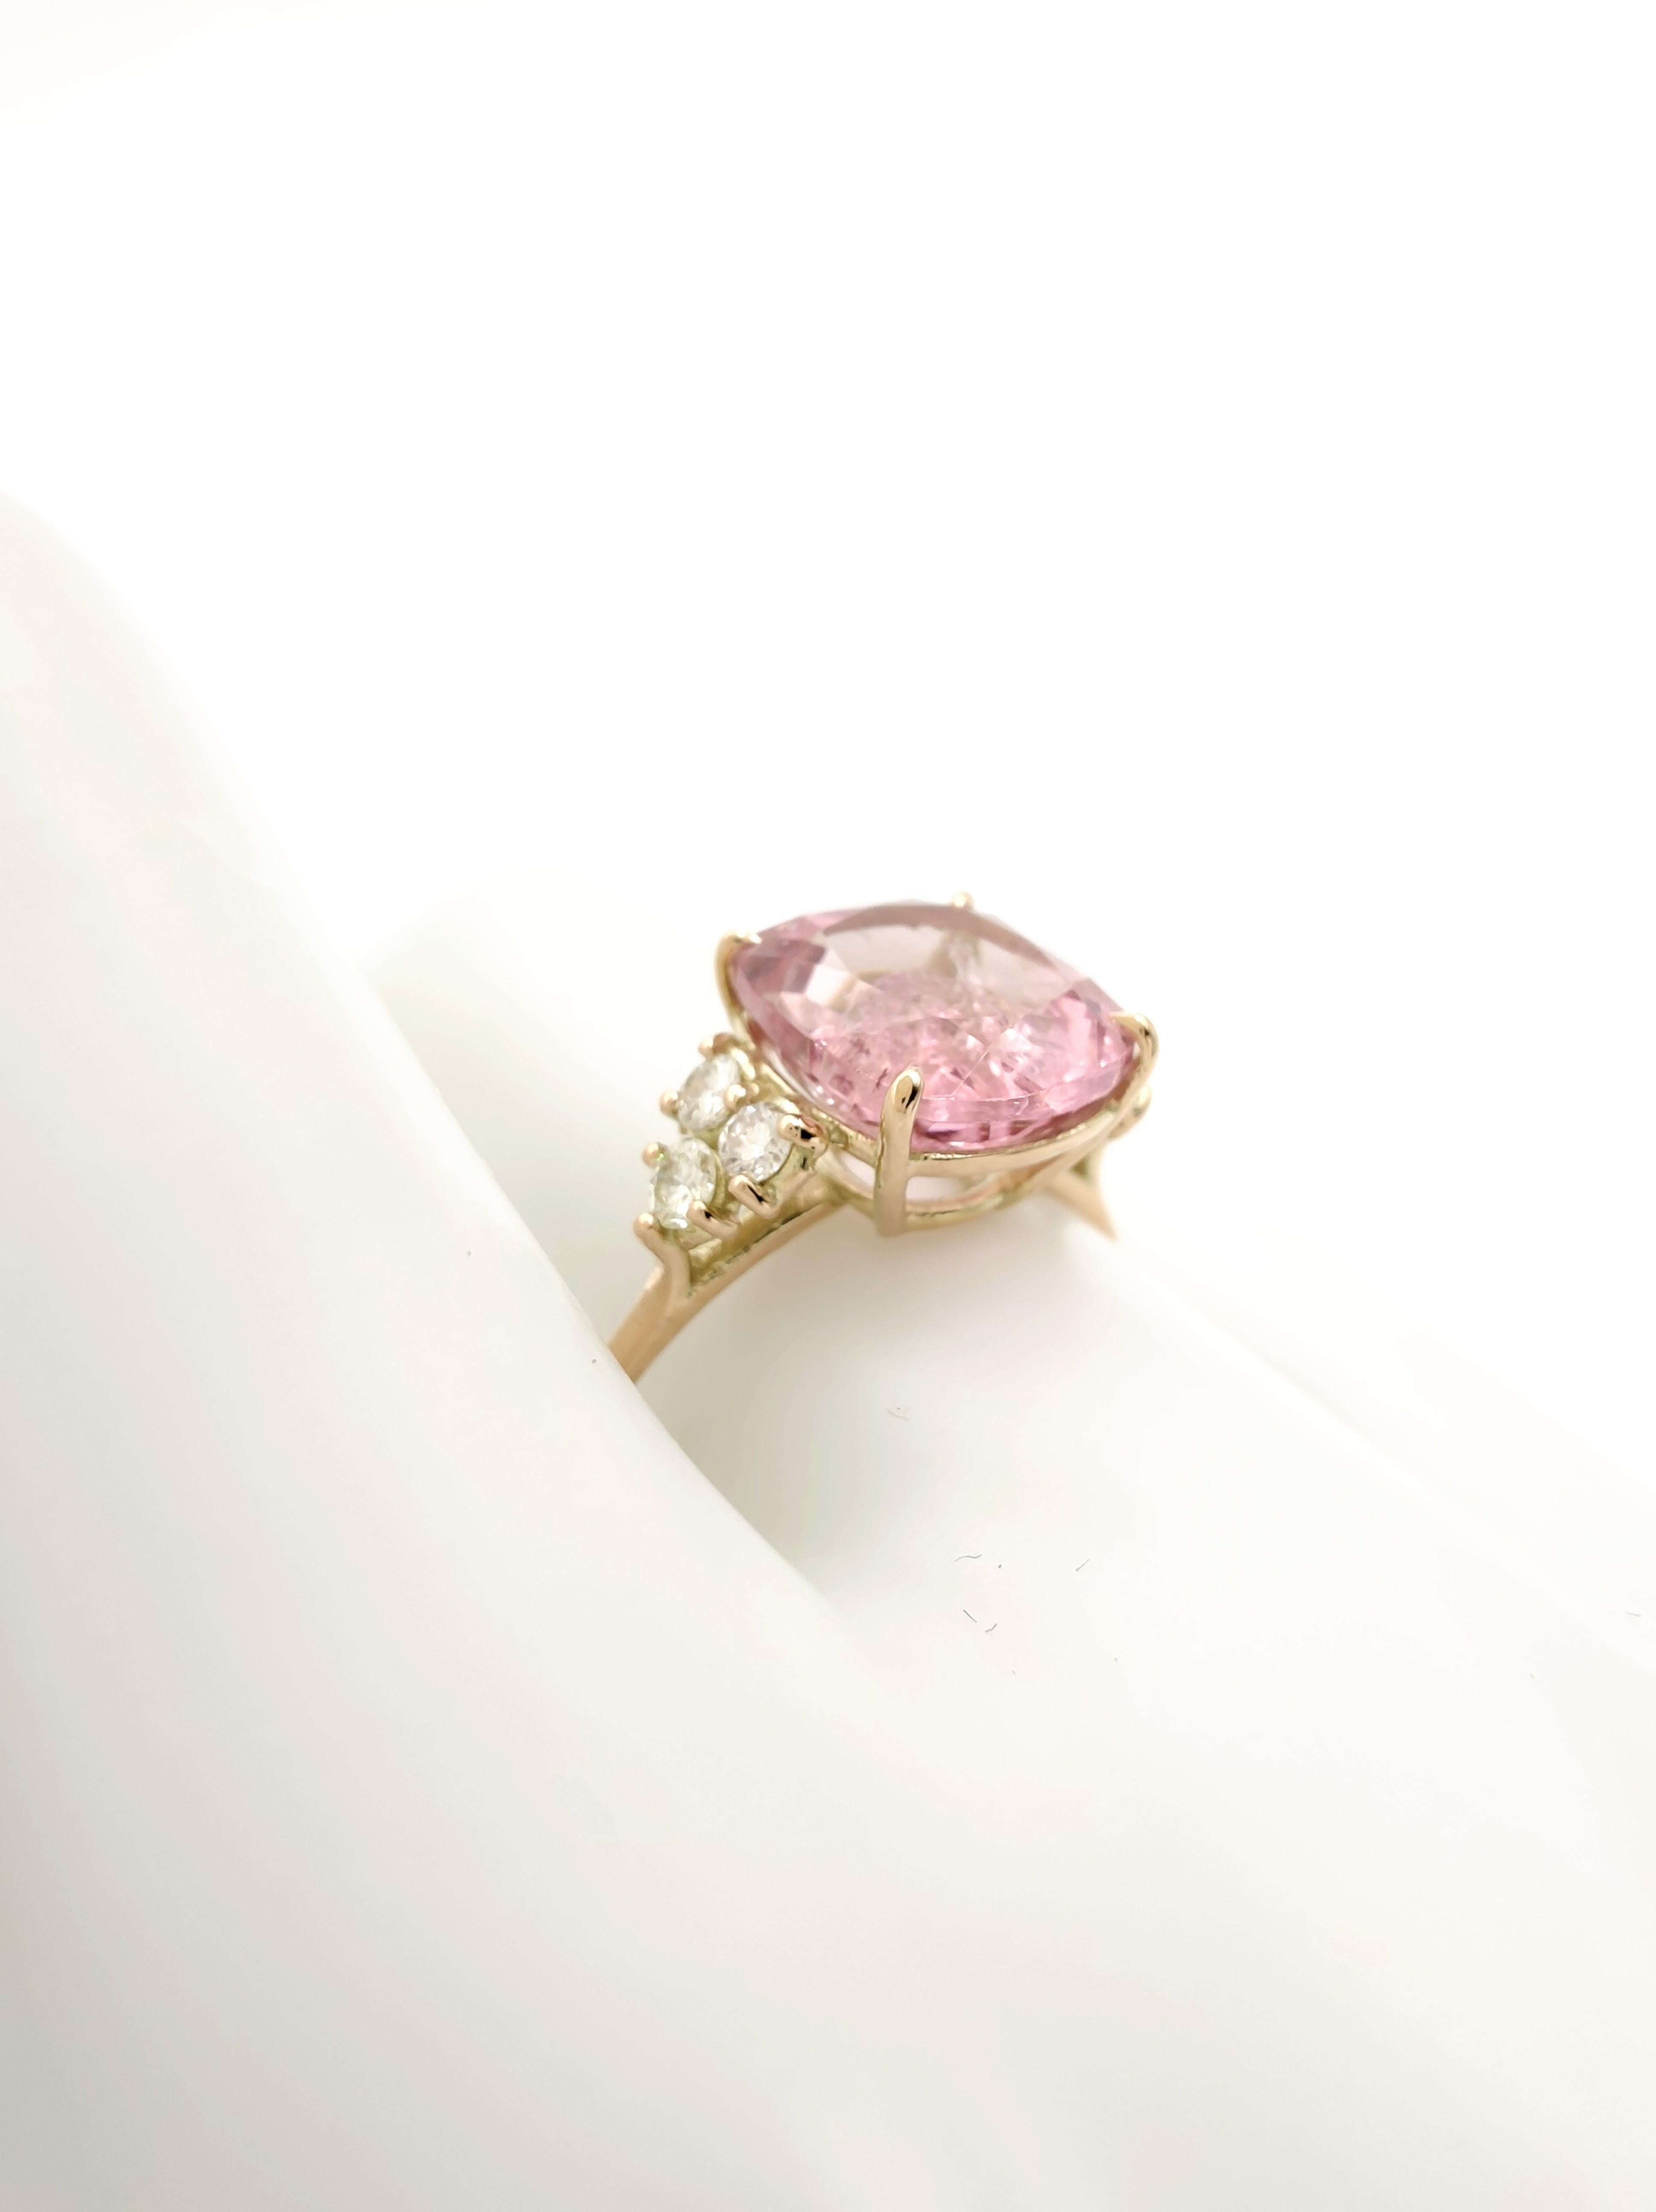 Women's Square Cushion 14K Solid Gold Pink Tourmaline and Diamond Ring For Sale